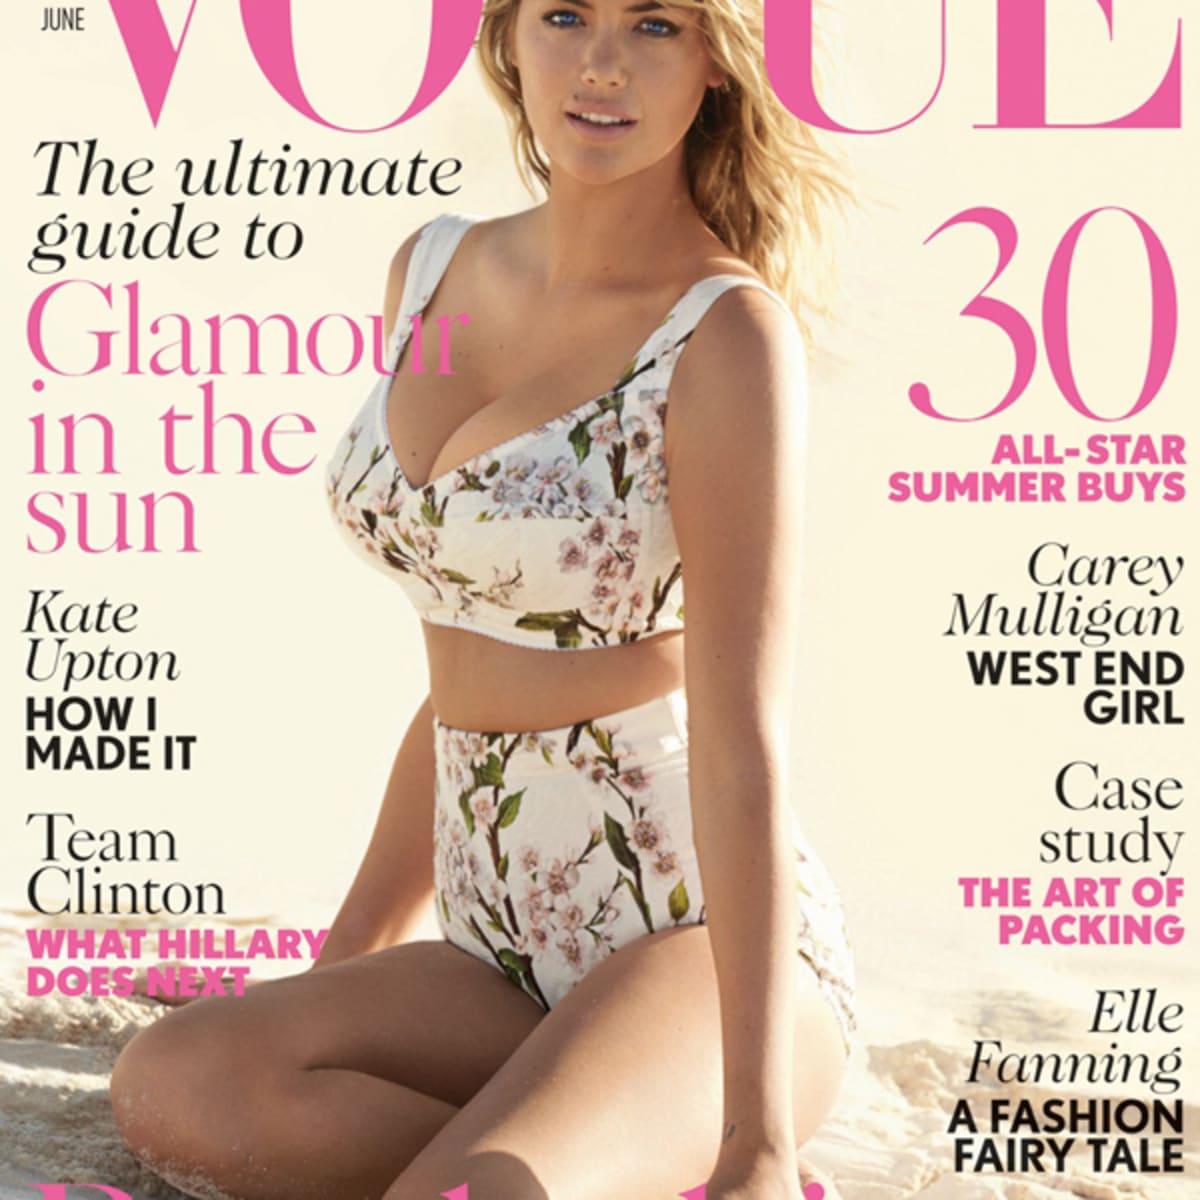 Kate Upton's British Vogue cover revealed in its entirety, does not  disappoint - Swimsuit